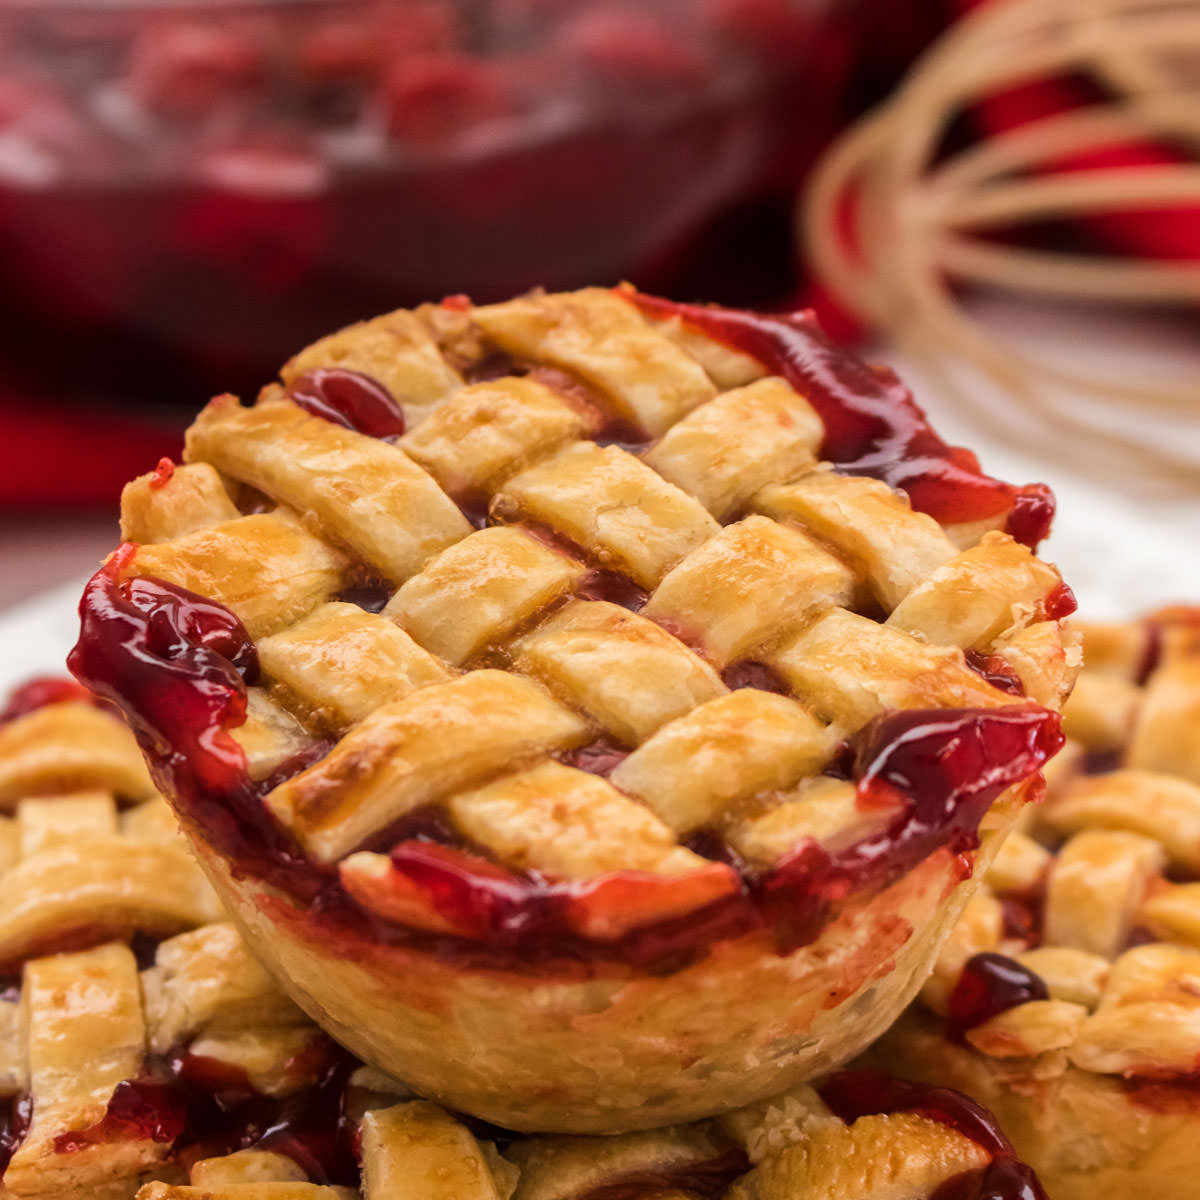 Closeup on a Mini Cherry Pie with a lattice pie crust top sitting on a pile of other pies.